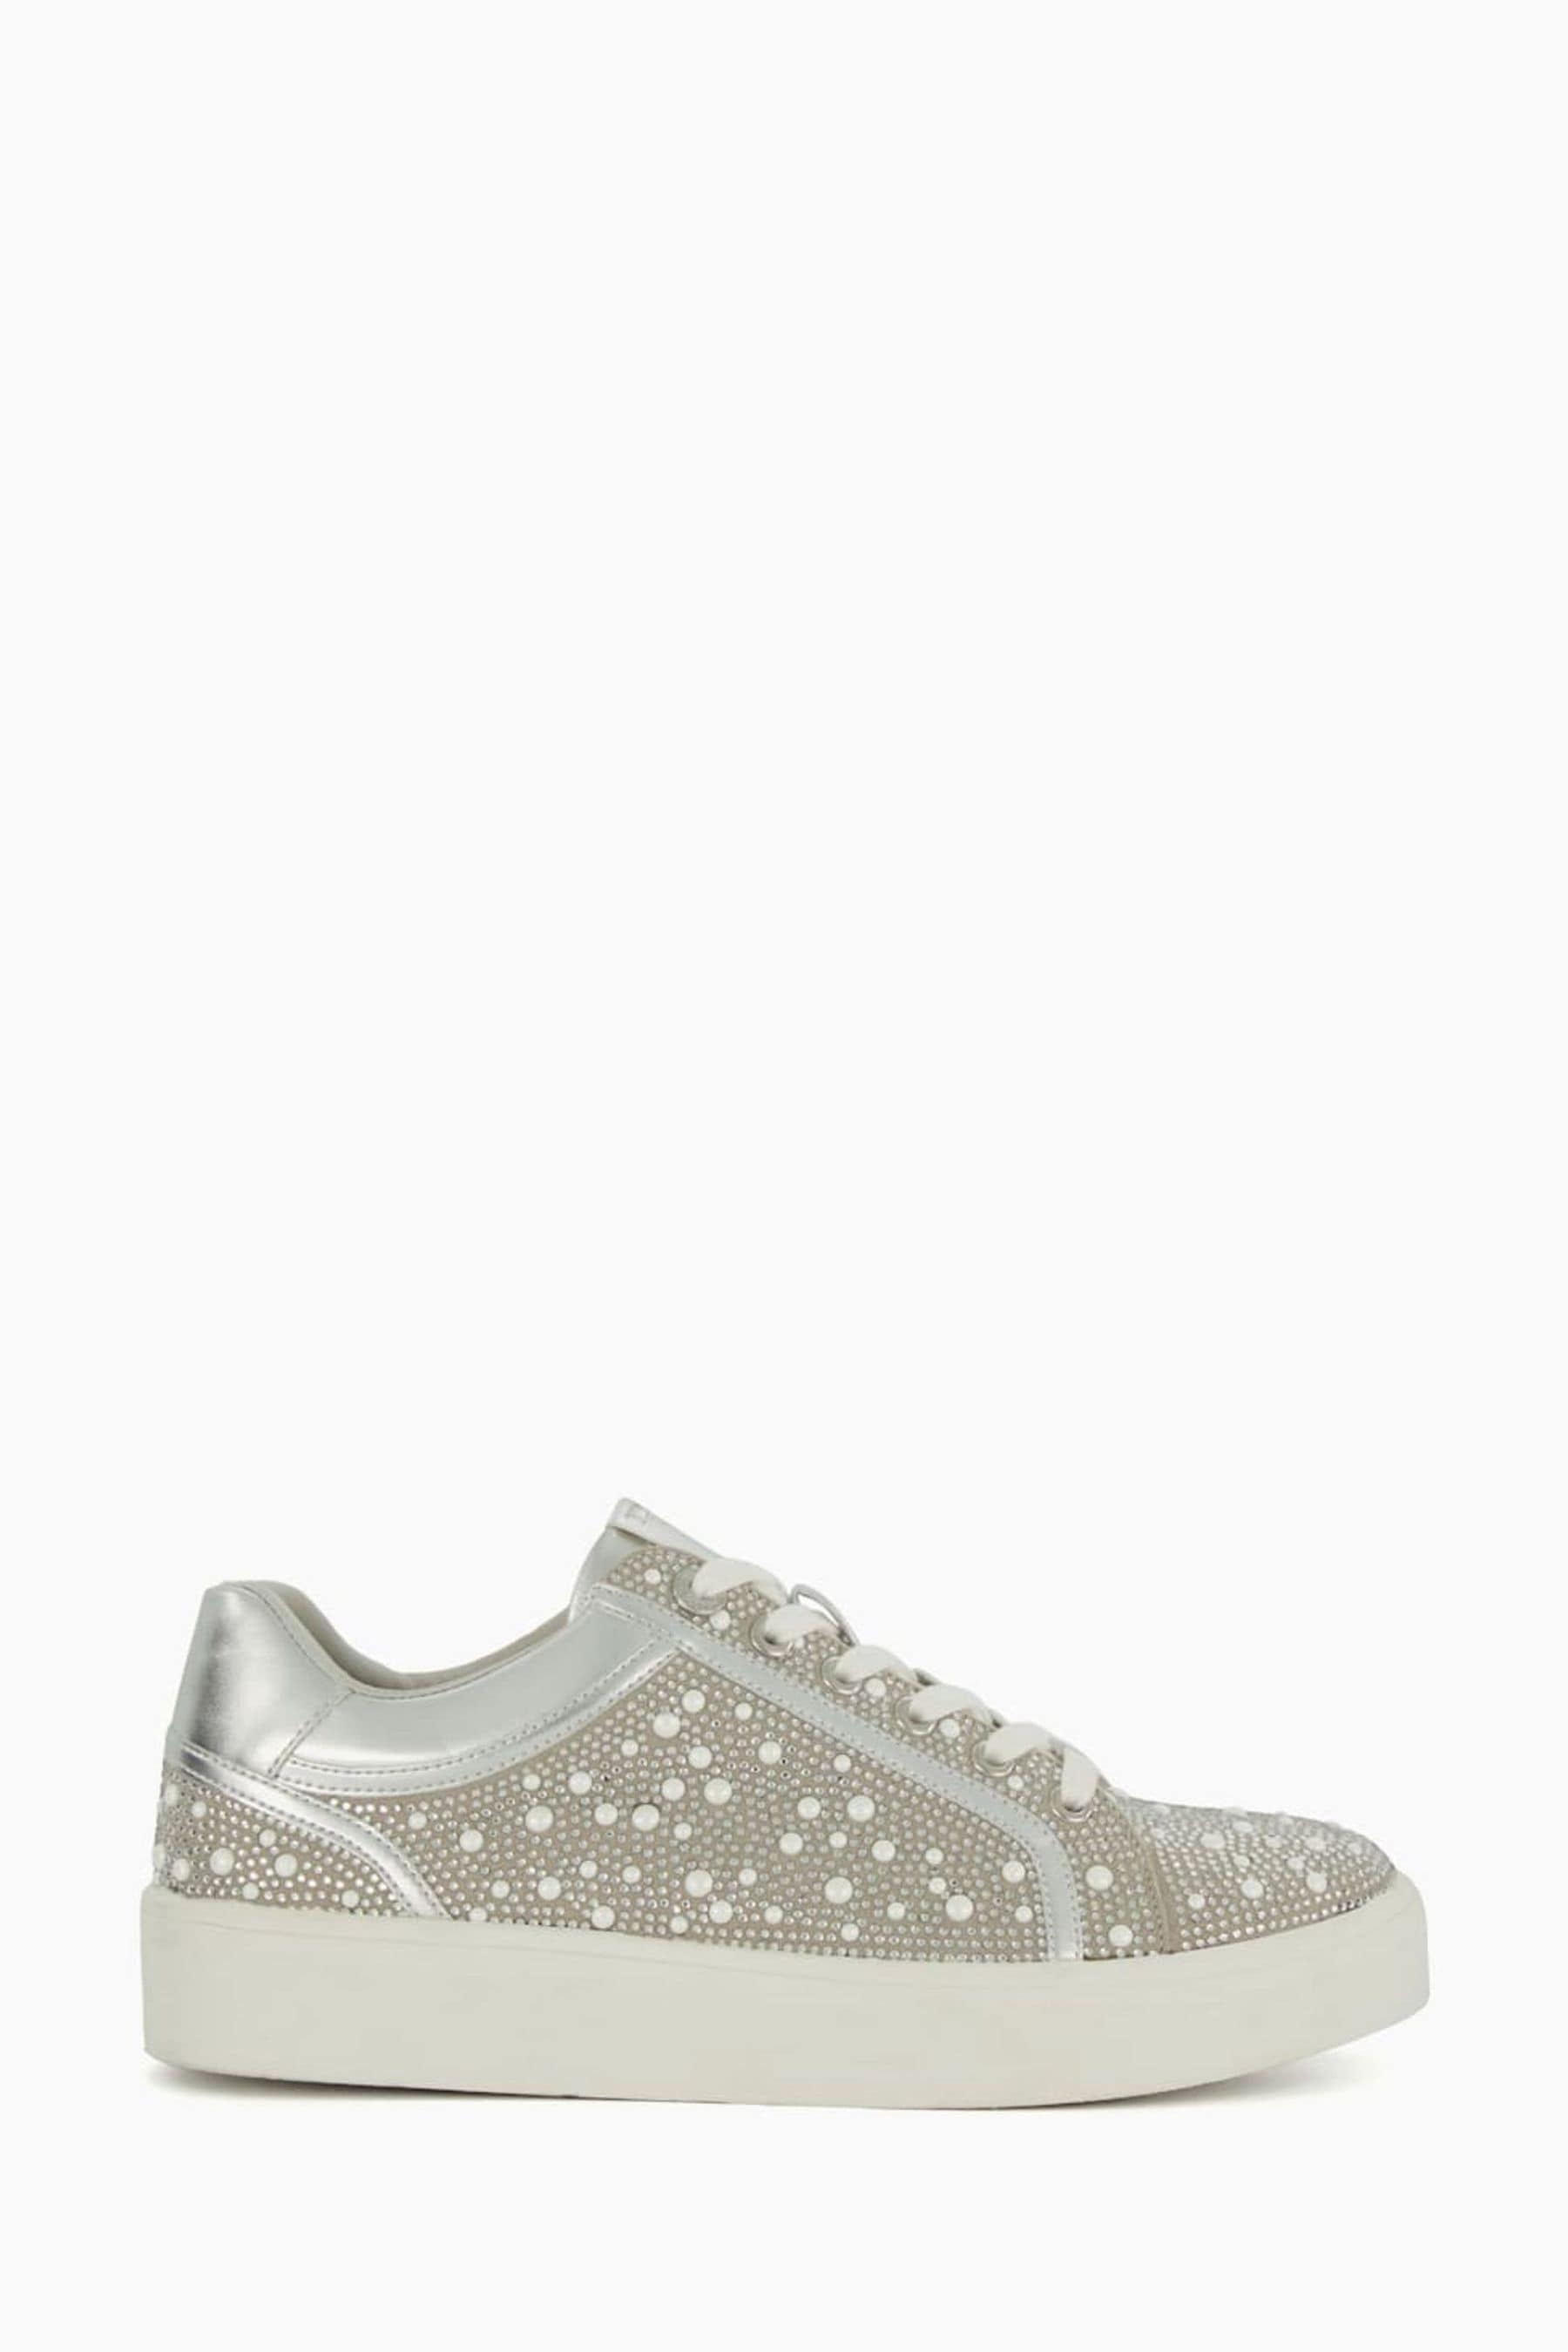 Buy Dune London Silver Everleas Embellished Cupsole Trainers from the ...